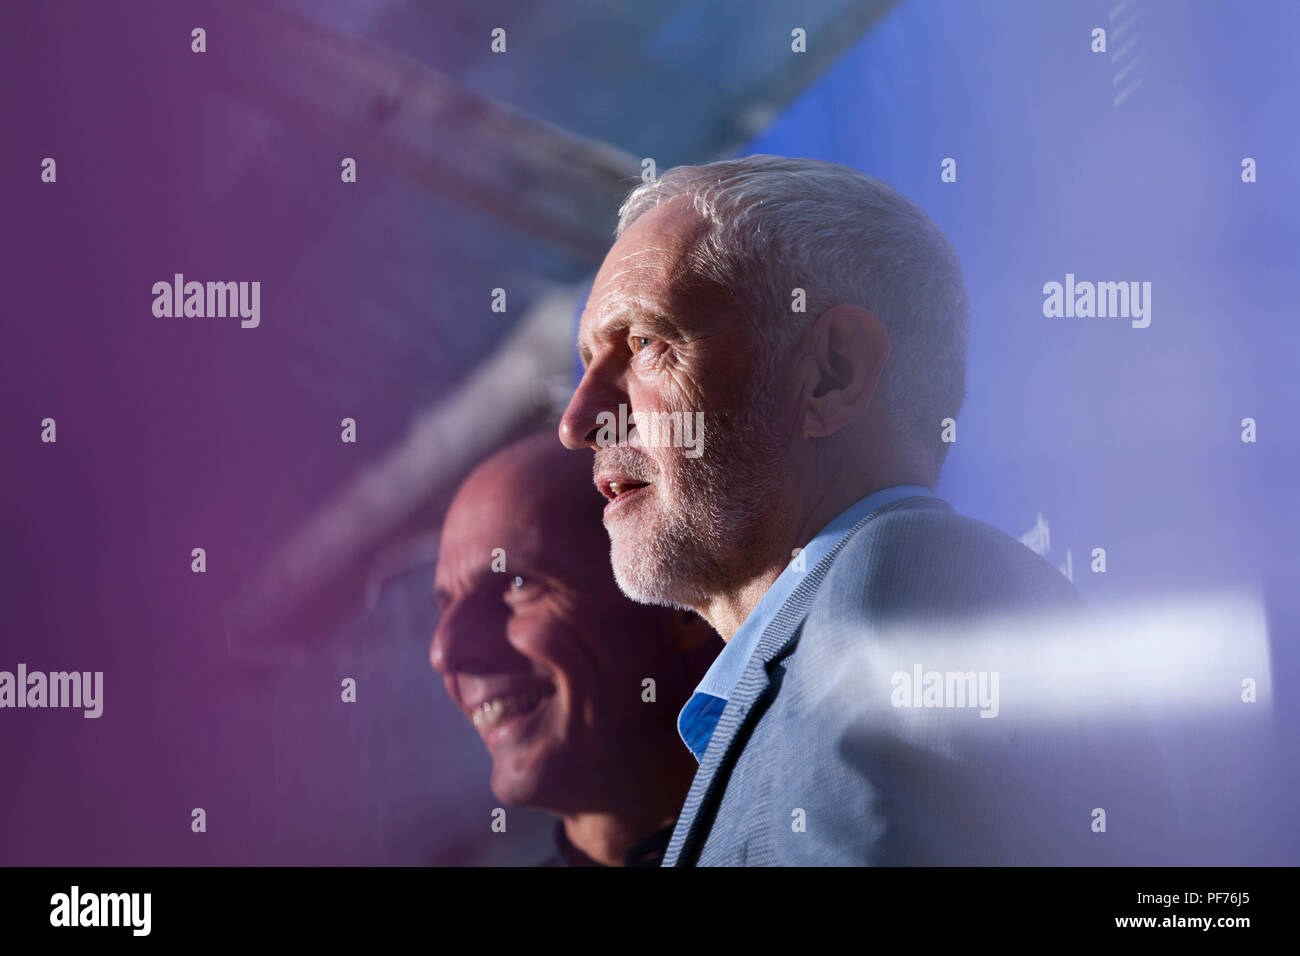 Edinburgh, UK. 20th August, 2018. Jeremy Corbyn (foreground) with Yanis Varoufakis. Pictured at the Edinburgh International Book Festival. Edinburgh, Scotland. At the Edinburgh event, DiEM25 co-founder Yanis Varoufakis discussed with the Labour leader the renaissance of the left and the future of democracy.   Picture by Gary Doak / Alamy Live News Stock Photo